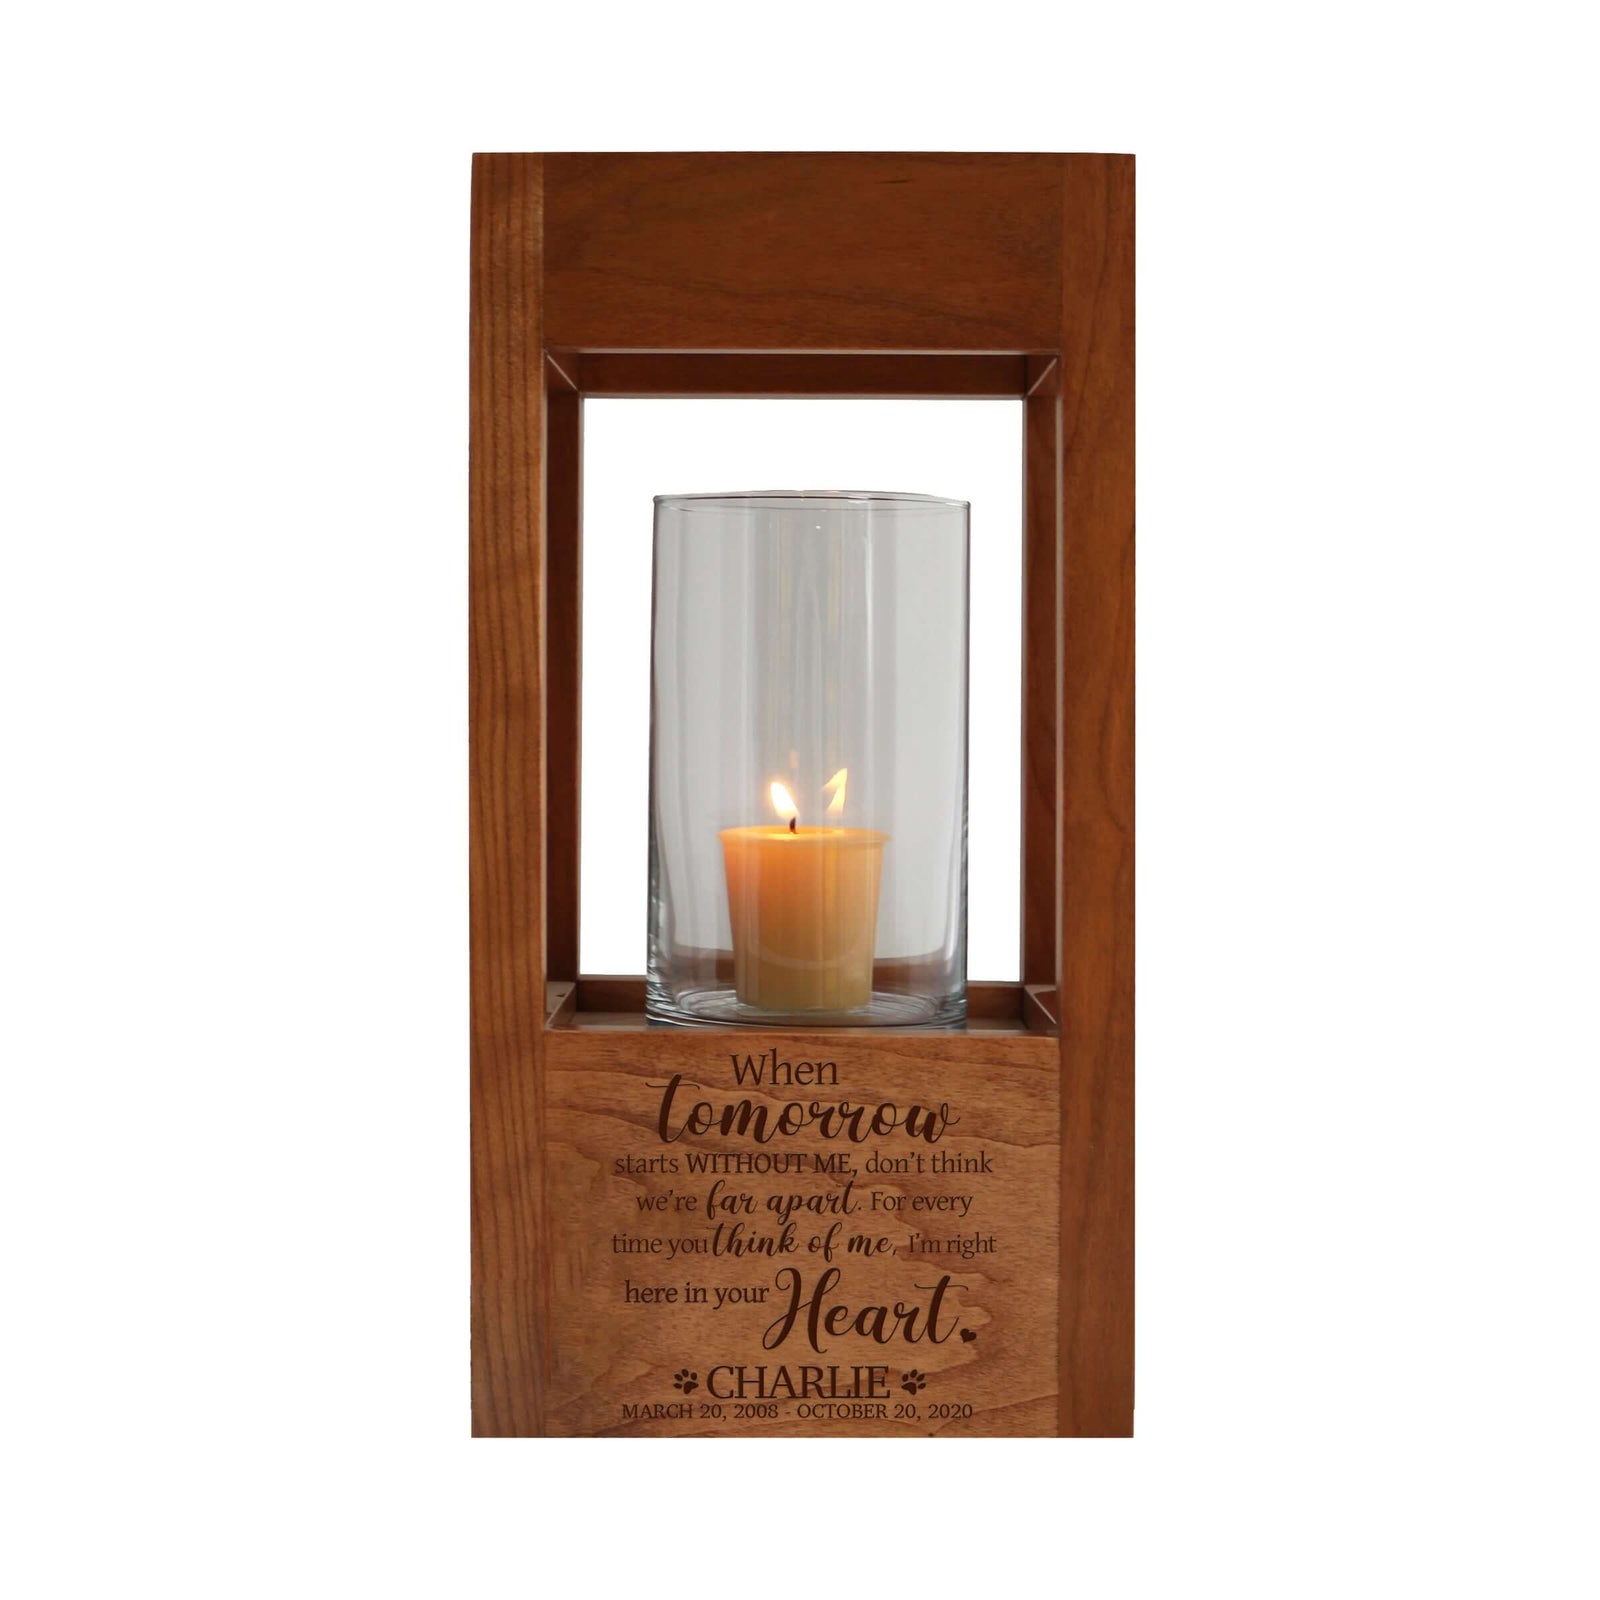 Pet Memorial Lantern Cremation Urn Box for Dog or Cat - When Tomorrow Starts Without Me